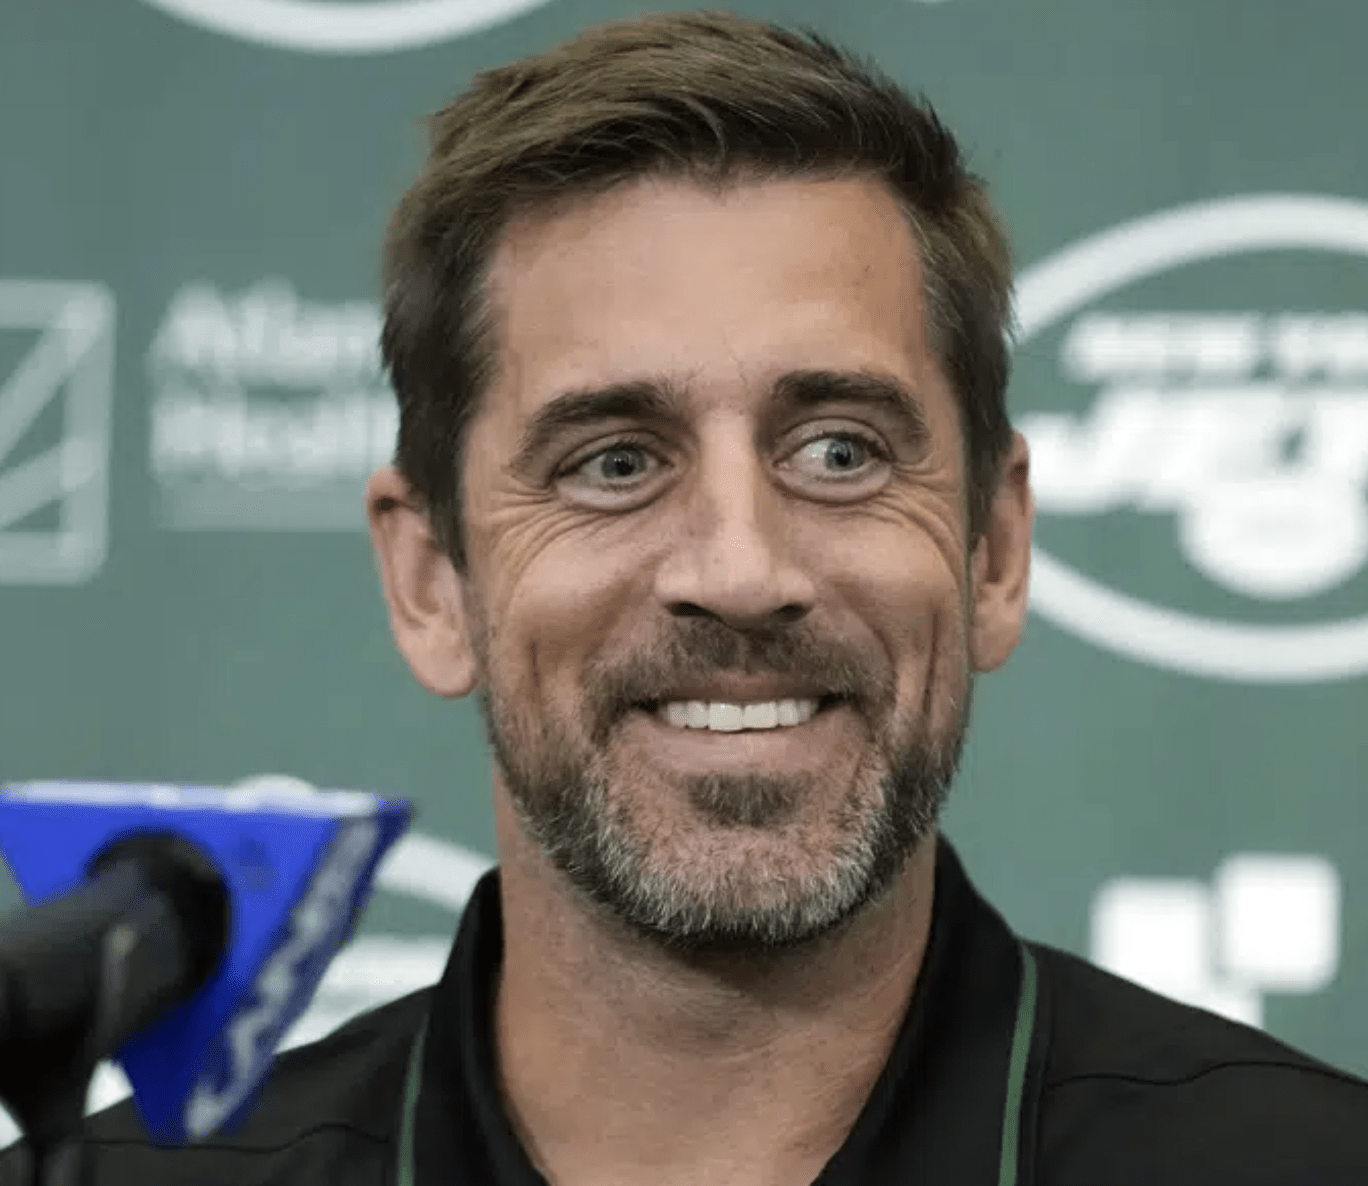 Aaron Rodgers smiles during an NFL football news conference at the Jets' training facility in Florham Park, N.J., Wednesday, April 26, 2023. Months after Colorado’s voters decided to join Oregon in decriminalizing psychedelic mushrooms, Denver will host a conference this week put on by a psychedelic advocacy group bringing together an unlikely cohort of speakers — including Rodgers, former Texas Gov. Rick Perry, and rapper Jaden Smith, the son of actor Will Smith. (AP Photo/Seth Wenig, File)